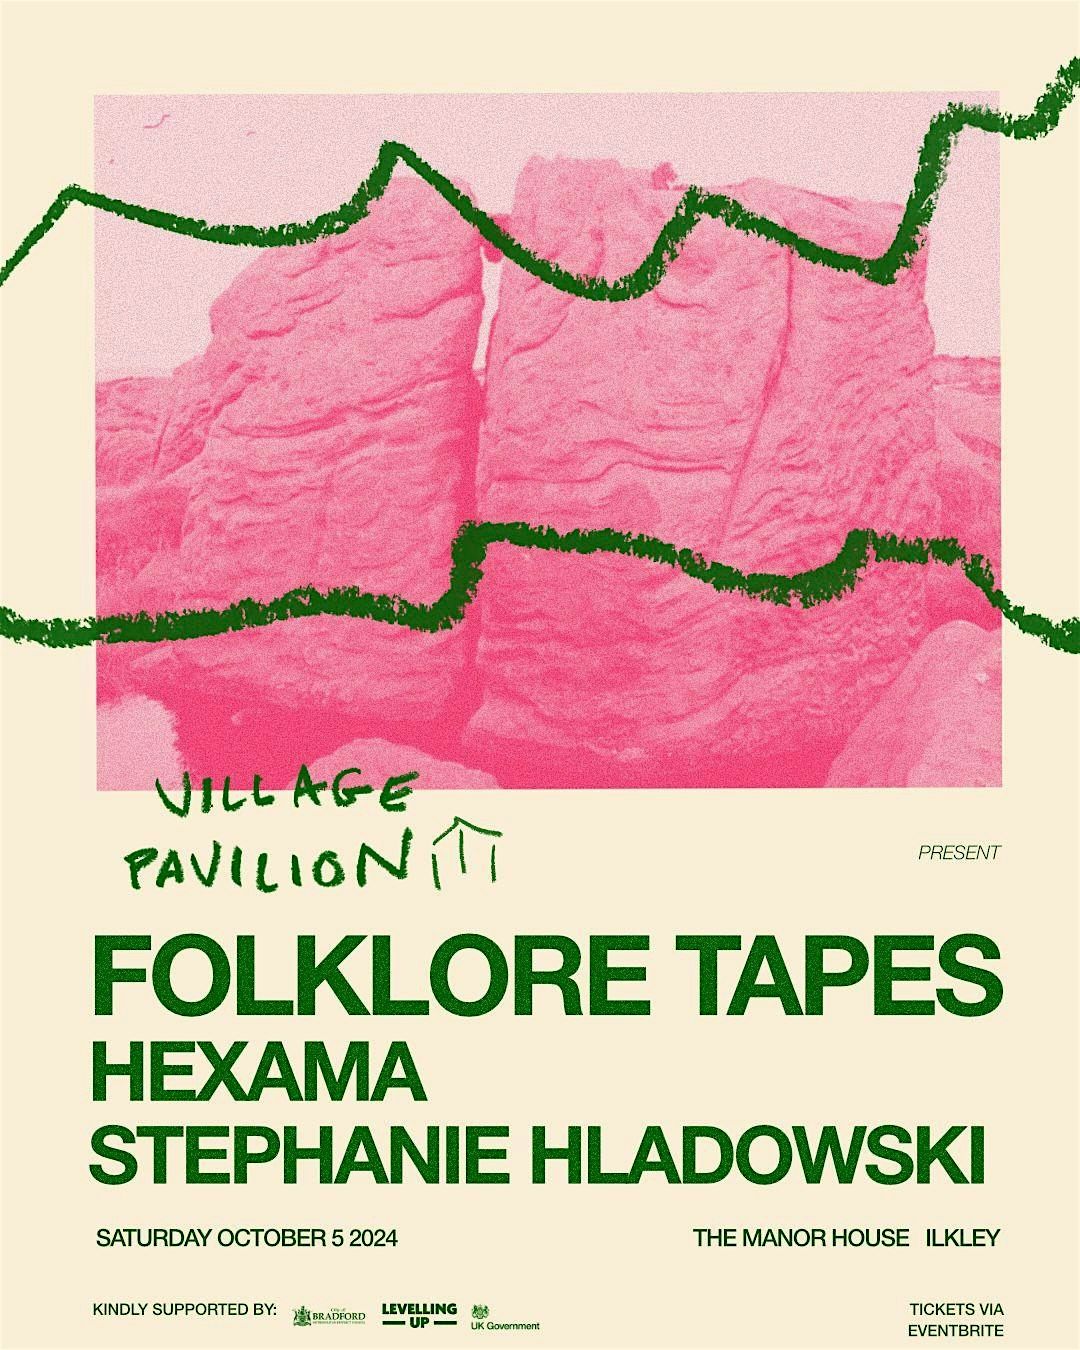 Folklore Tapes at the Manor House